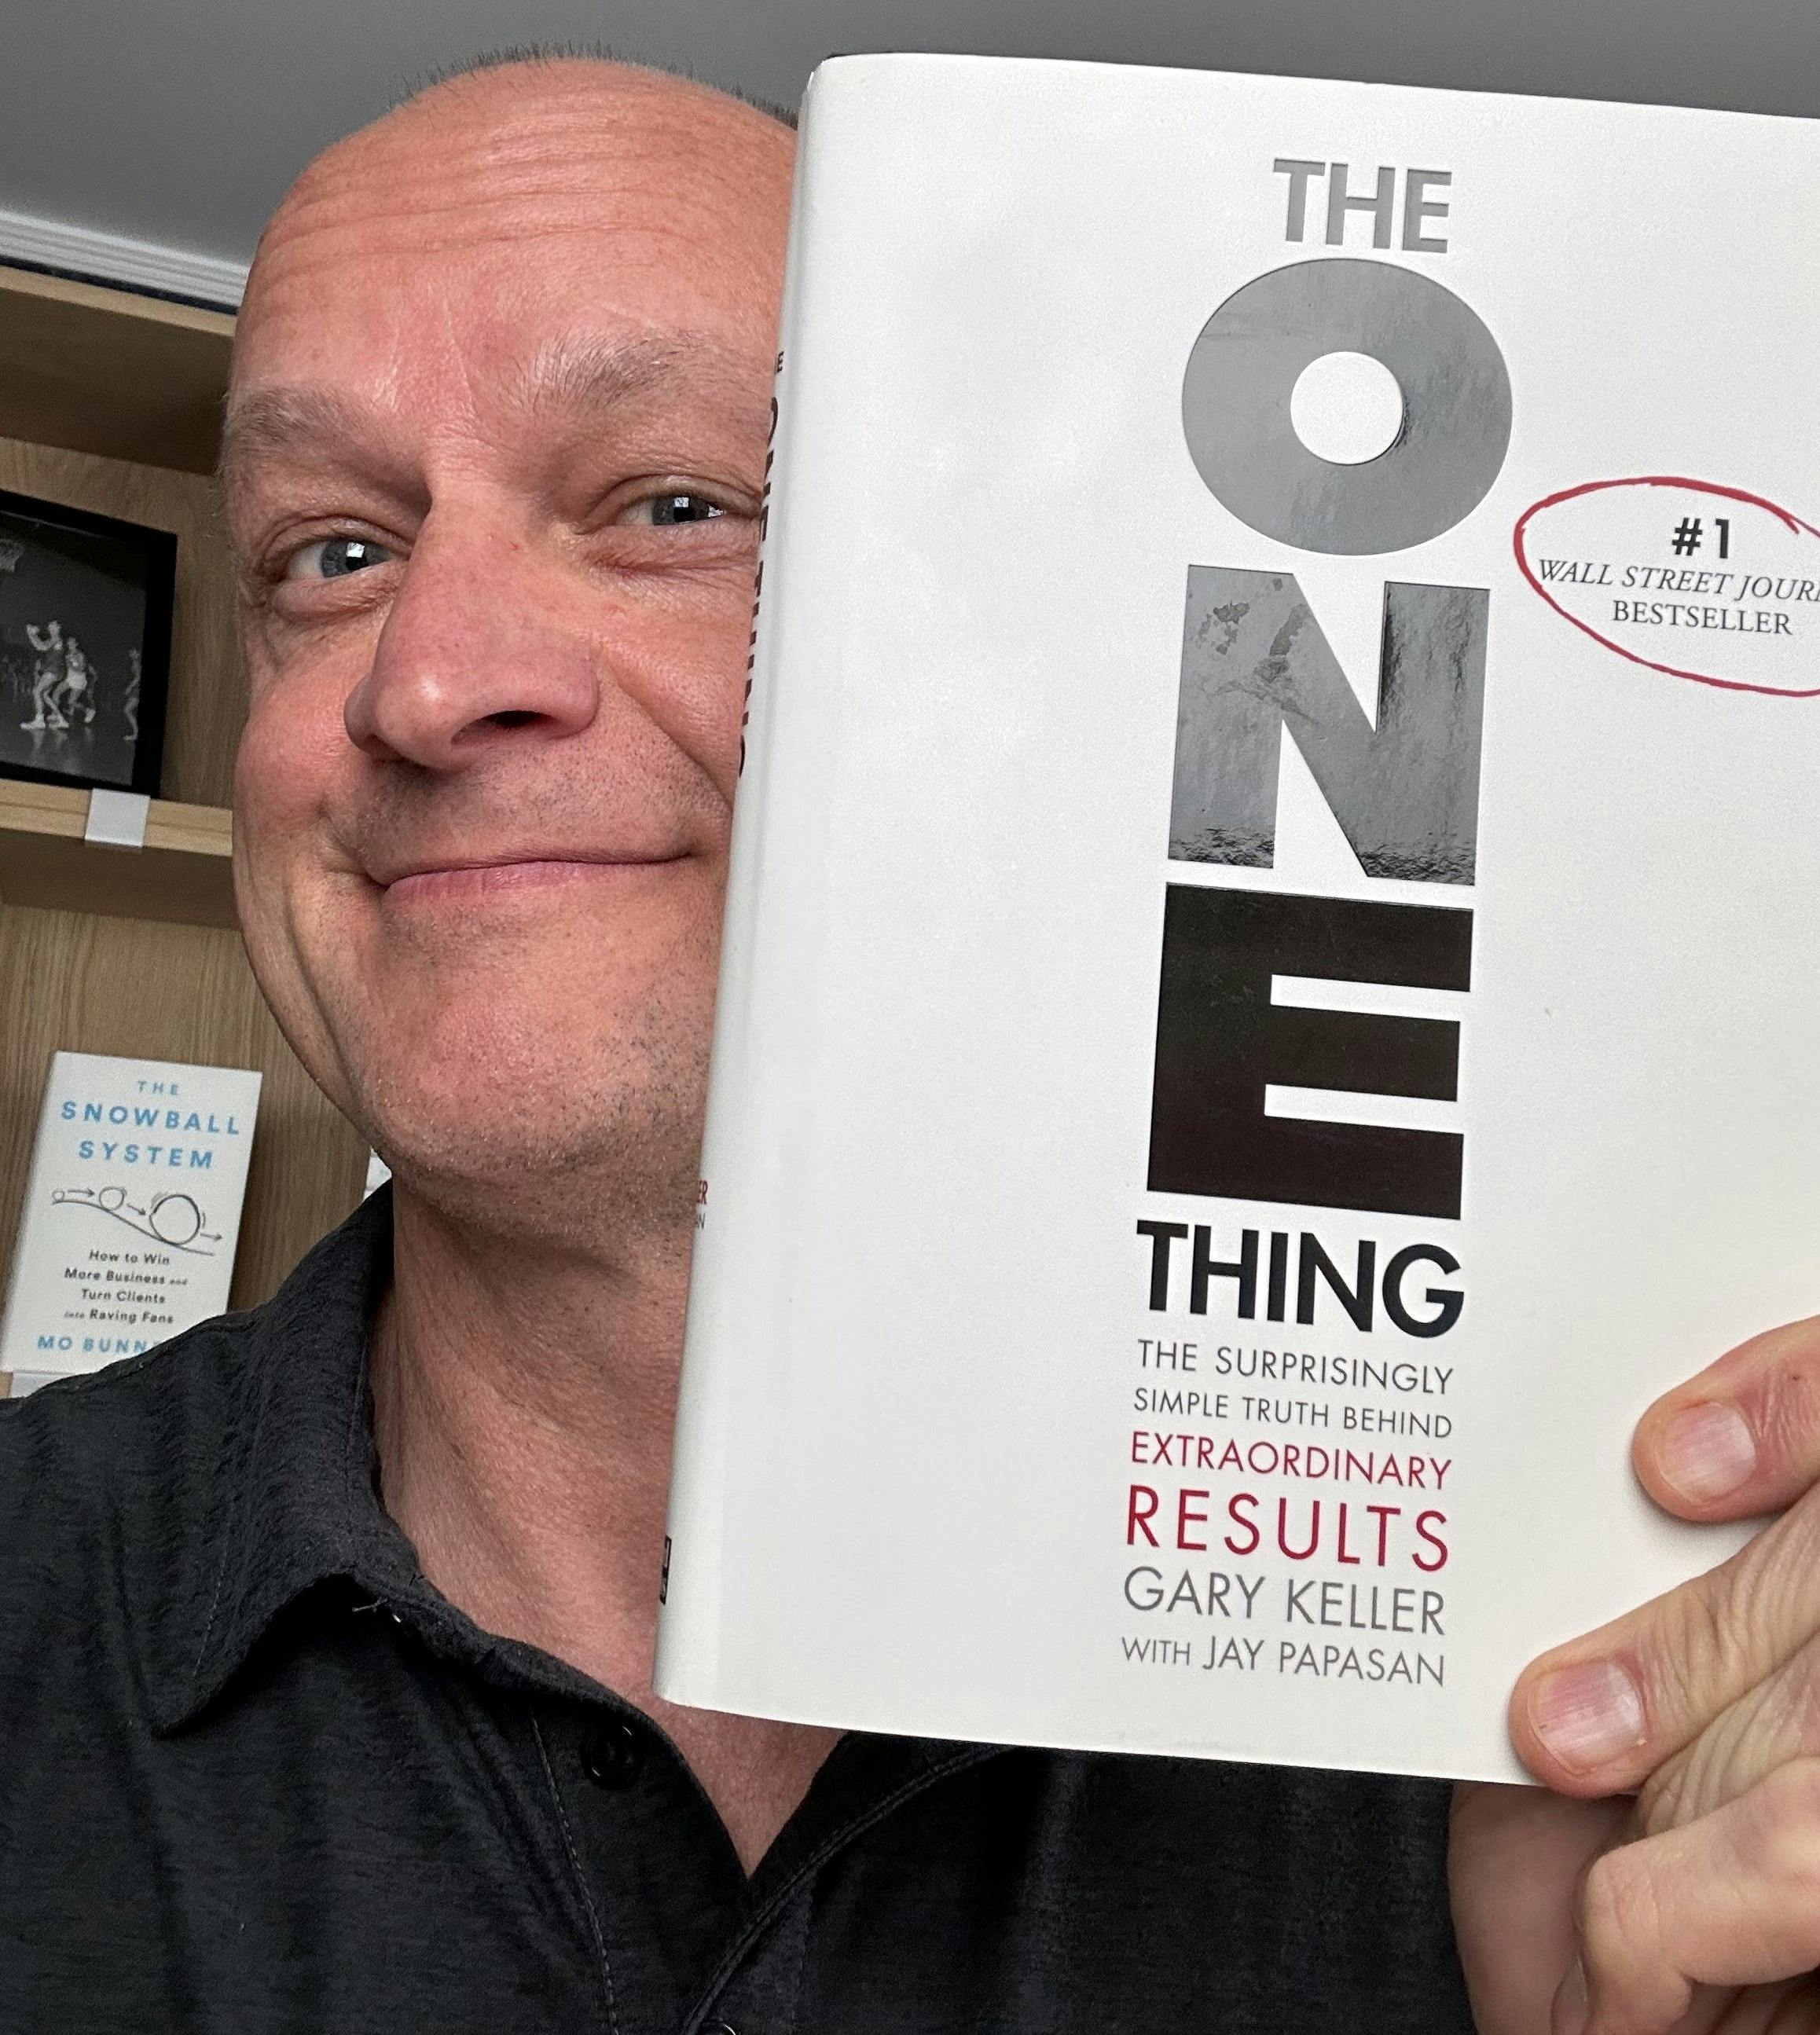 Picture of Mo holding coauthor Jay Papasan's book The One Thing